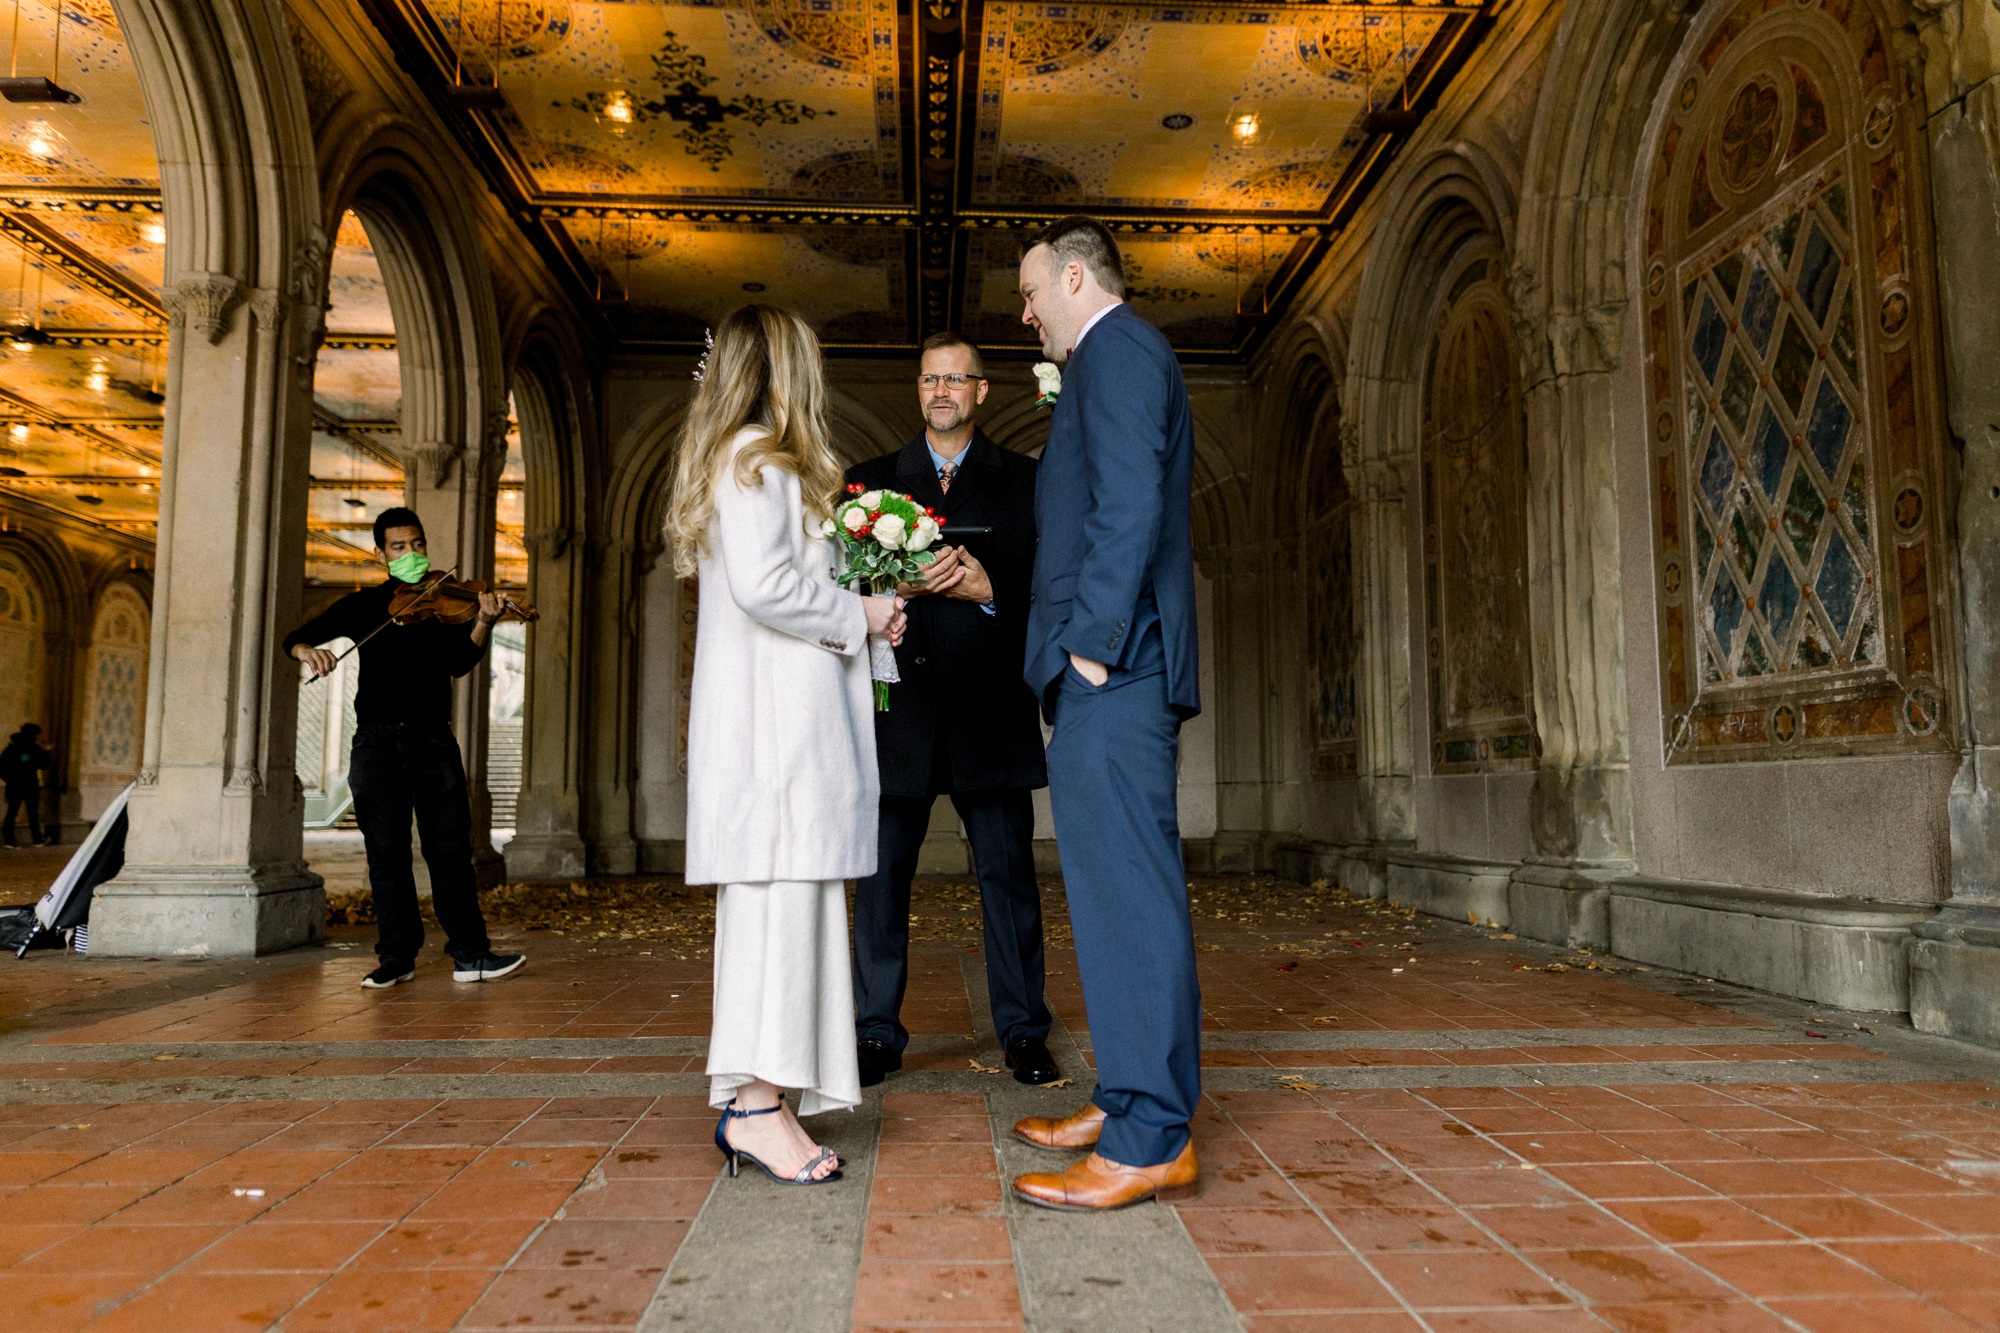 Elopement in Central Park at Bethesda Terrace